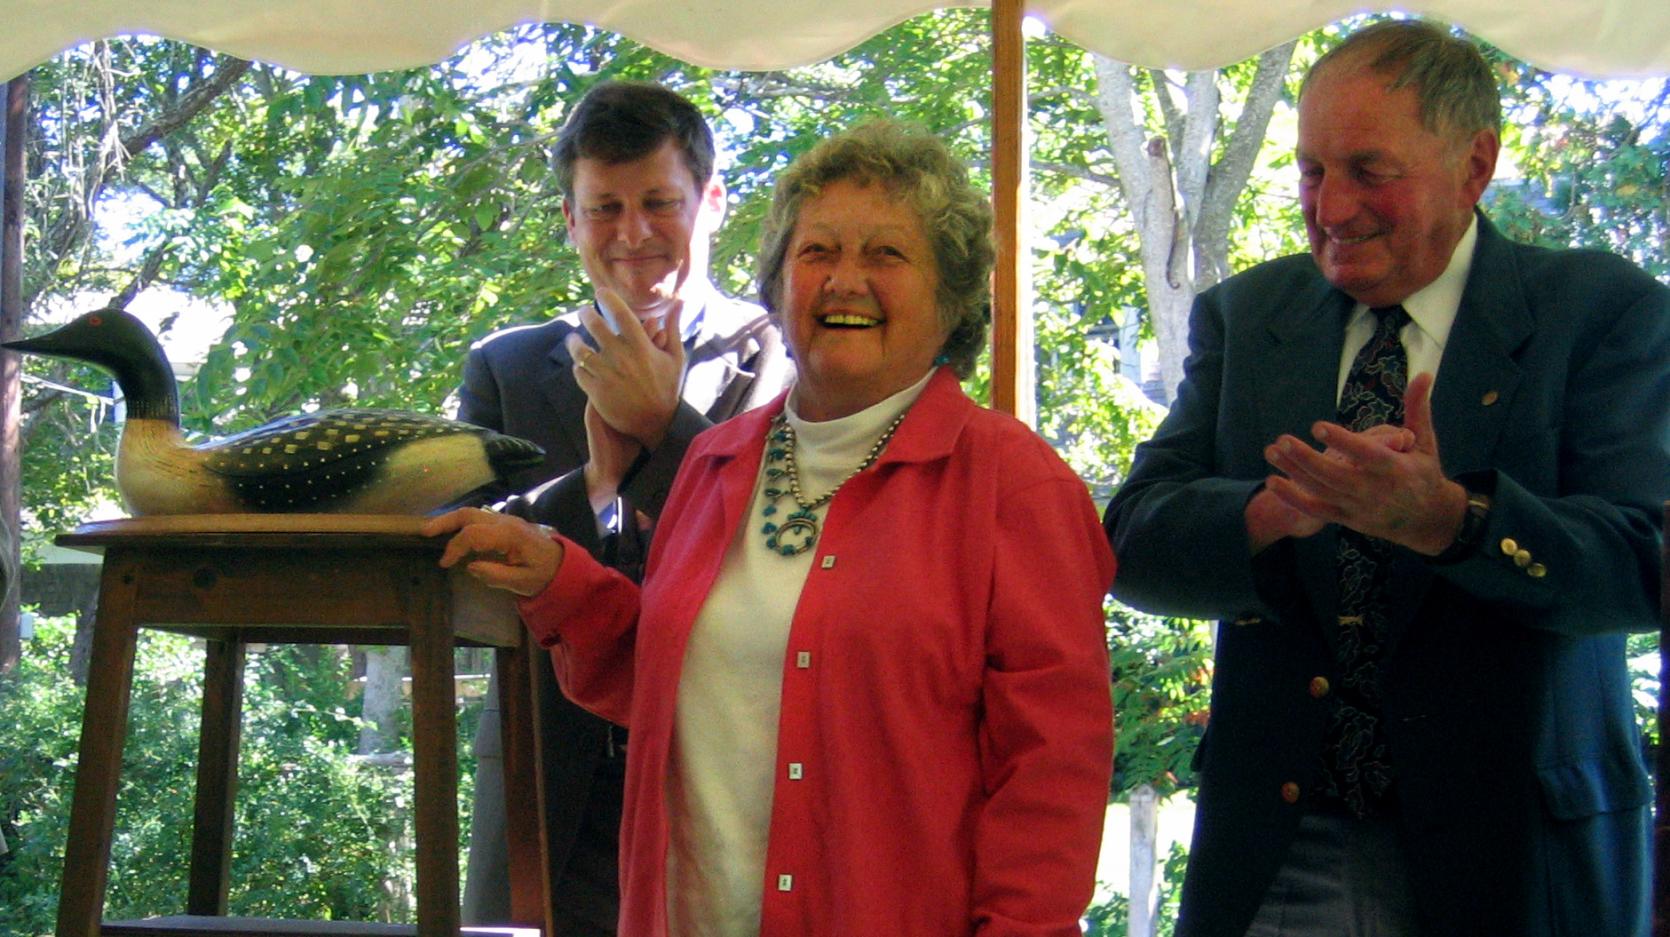 Kathleen Anderson received the Fran Sargent Award in 2007